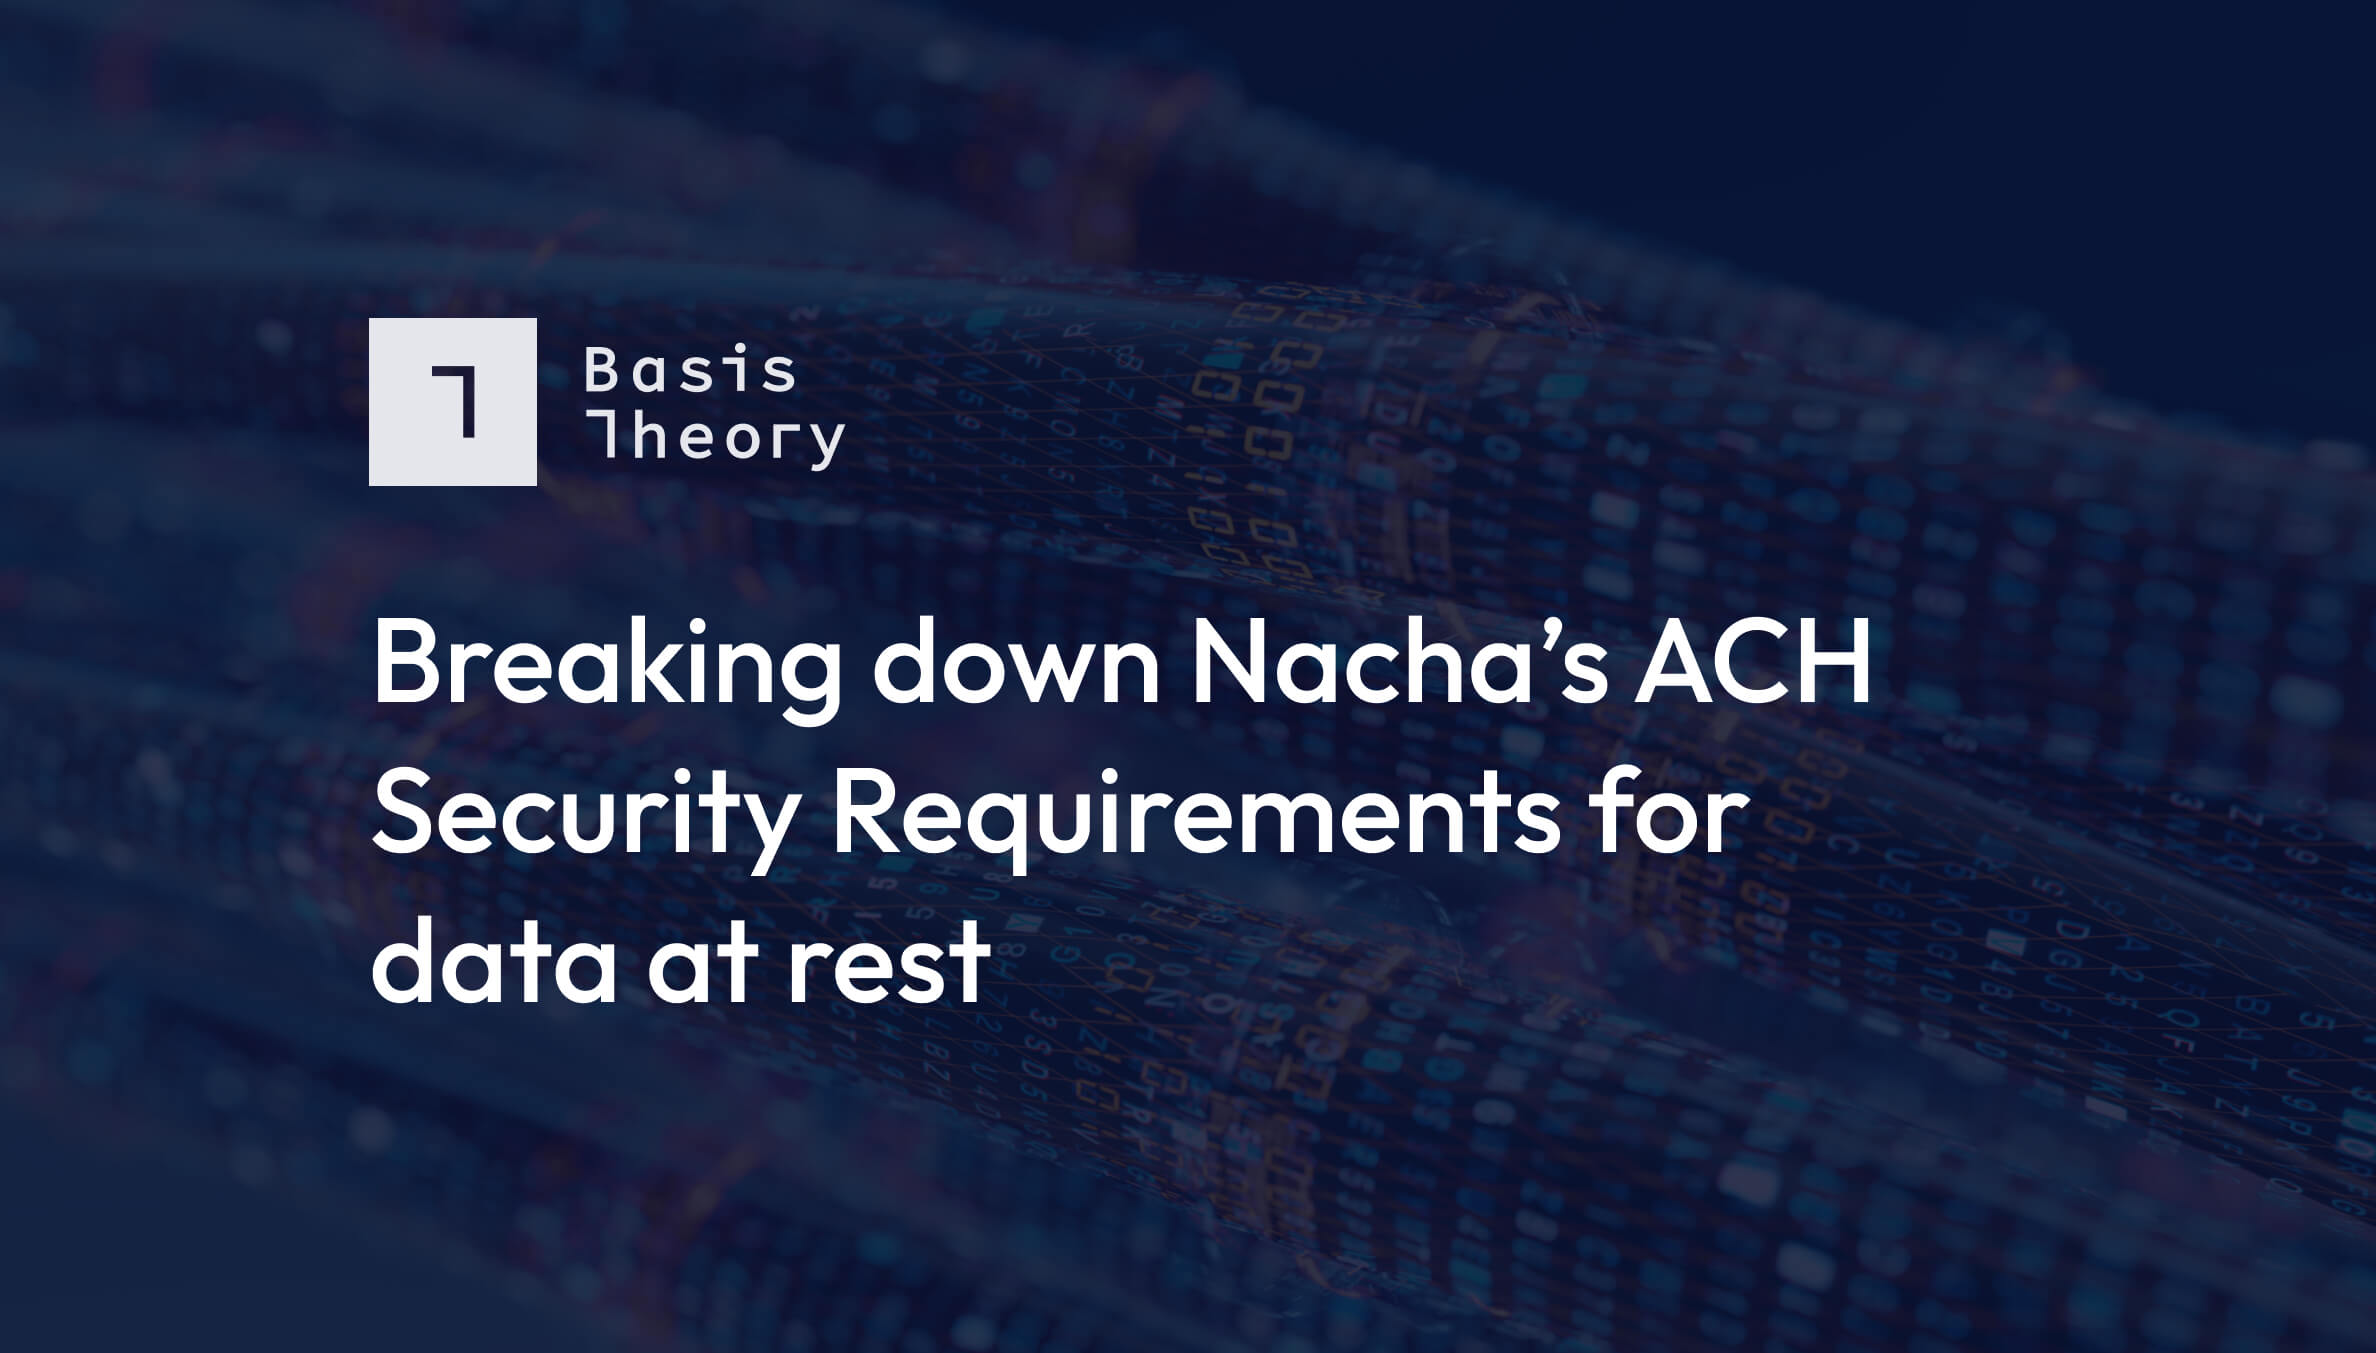 Nacha's security requirements for data at rest